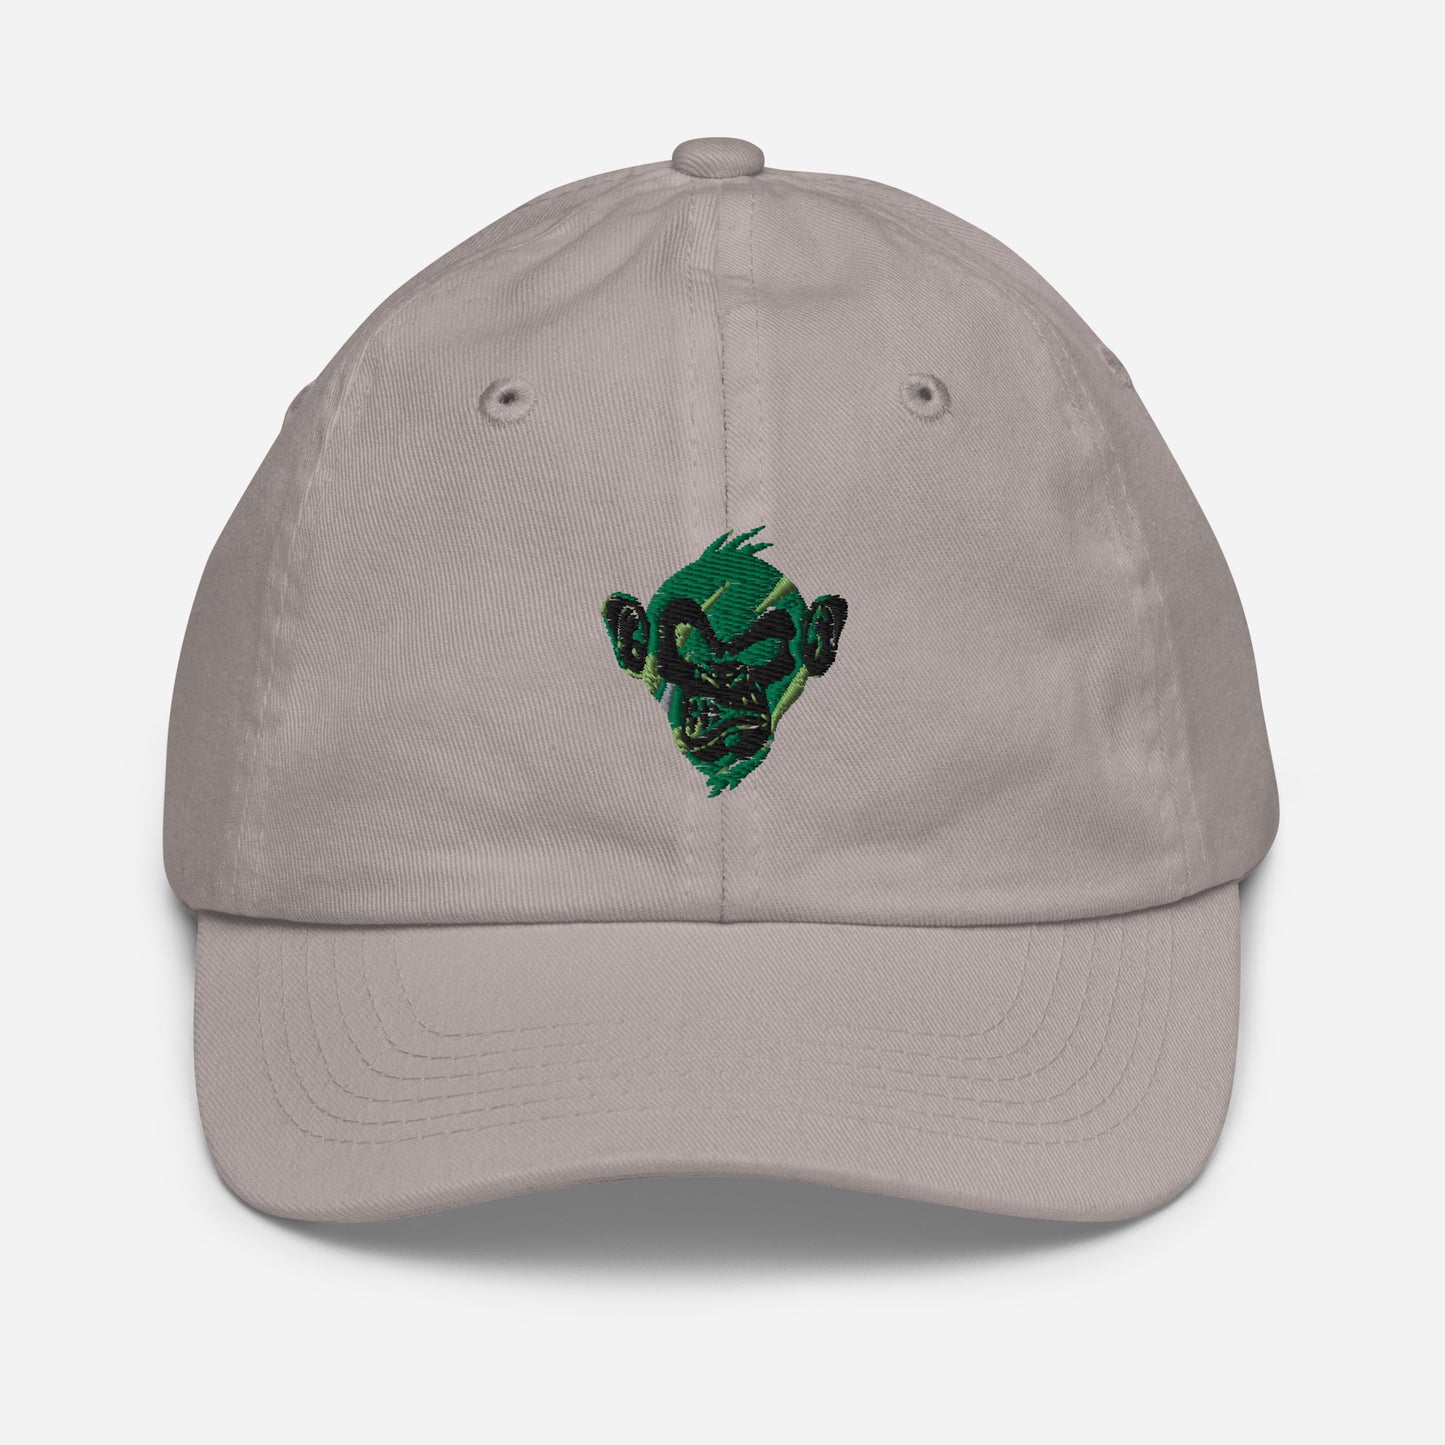 Grey baseball cap foor Youth with print of a Cool monkey in black light green